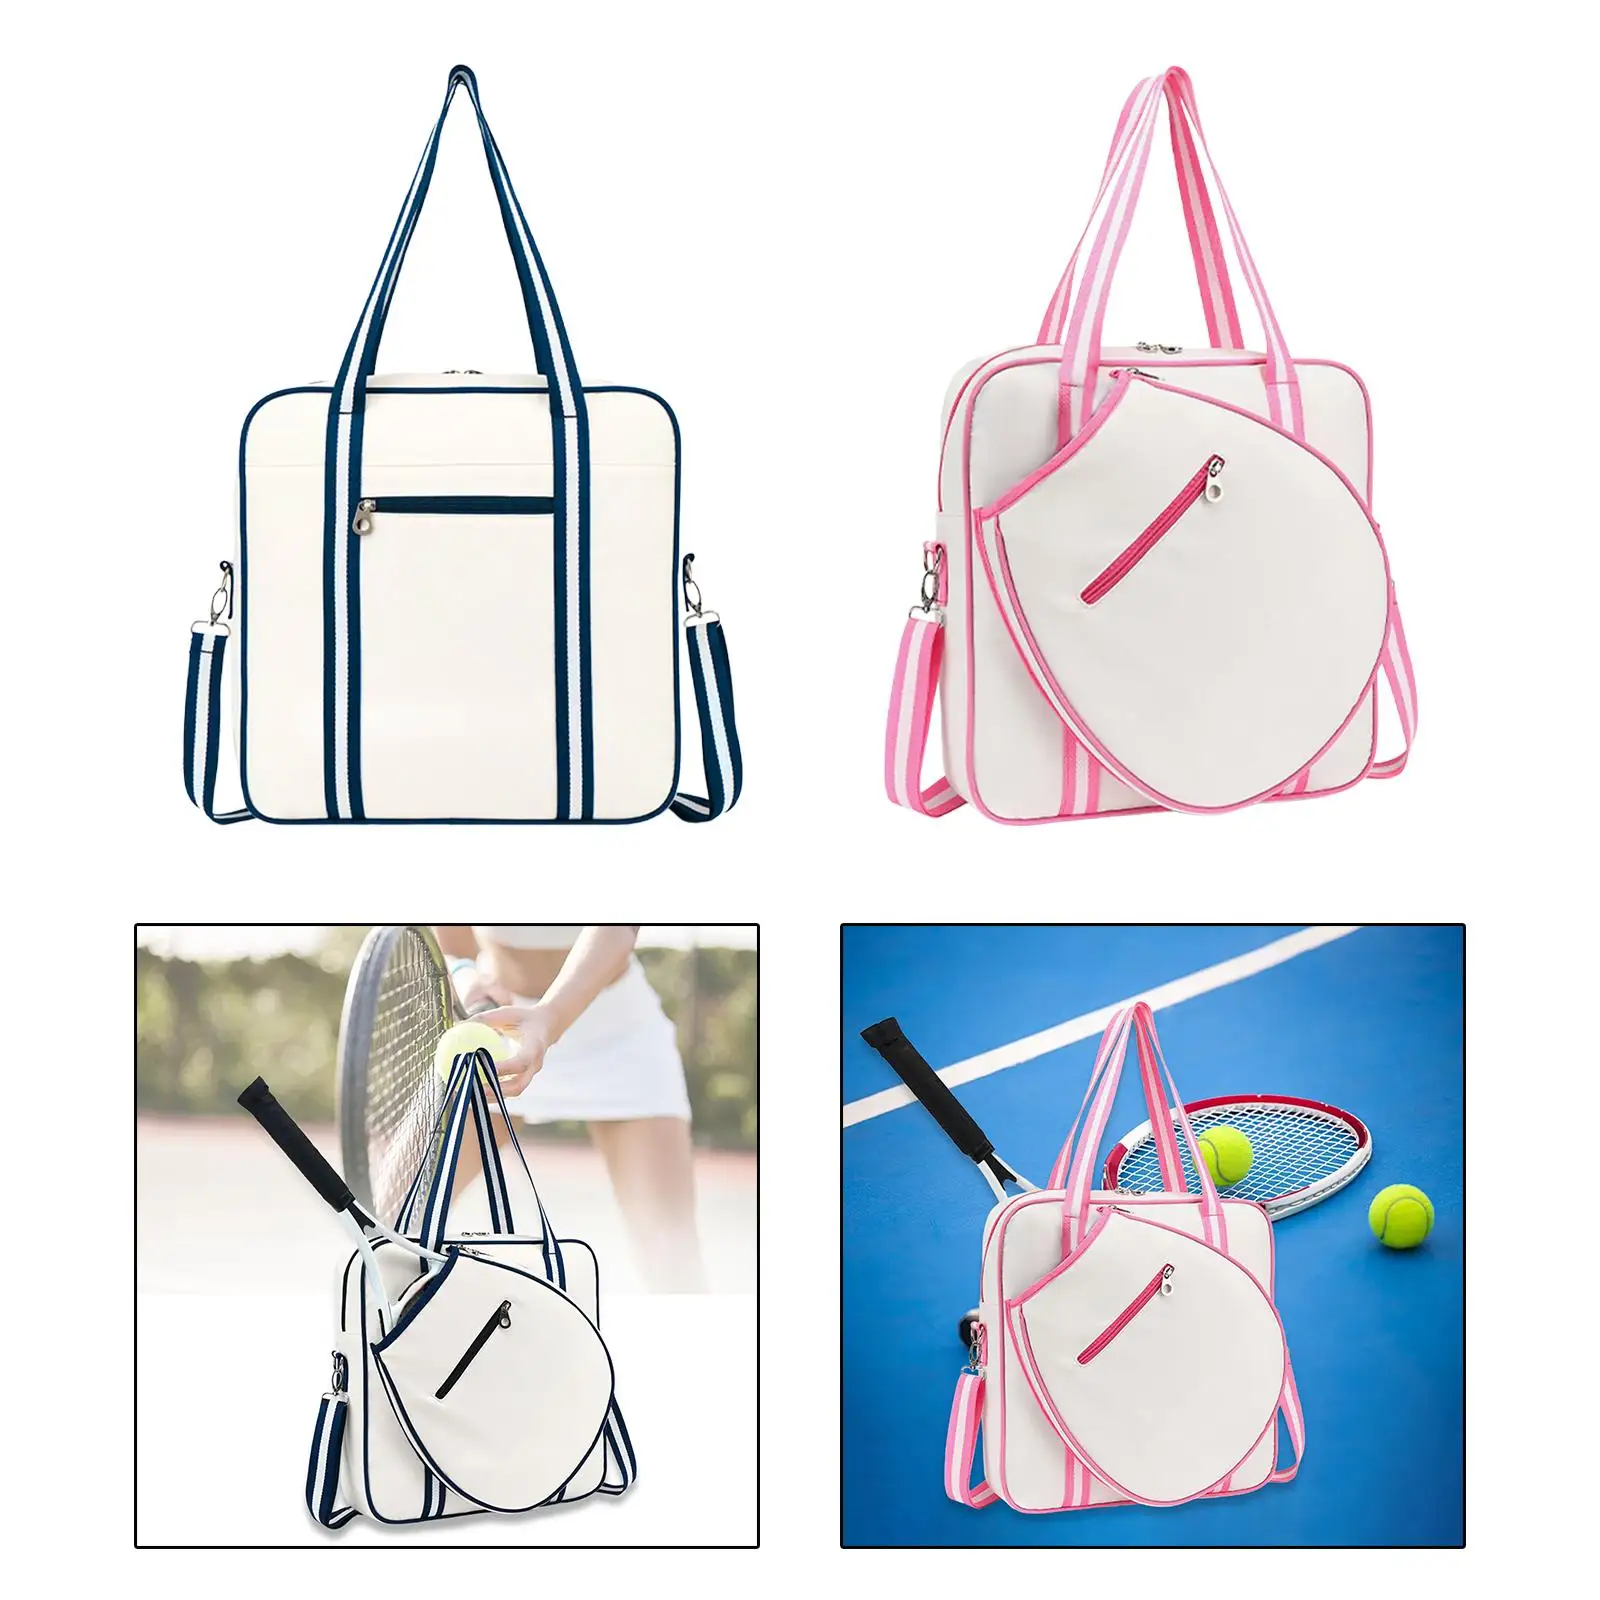 Tennis Racket Shoulder Bag Tennis Tote Bag Water Resistant with Multi Pockets for Biking, Outdoor Tour, Gym, Picnic, Hiking